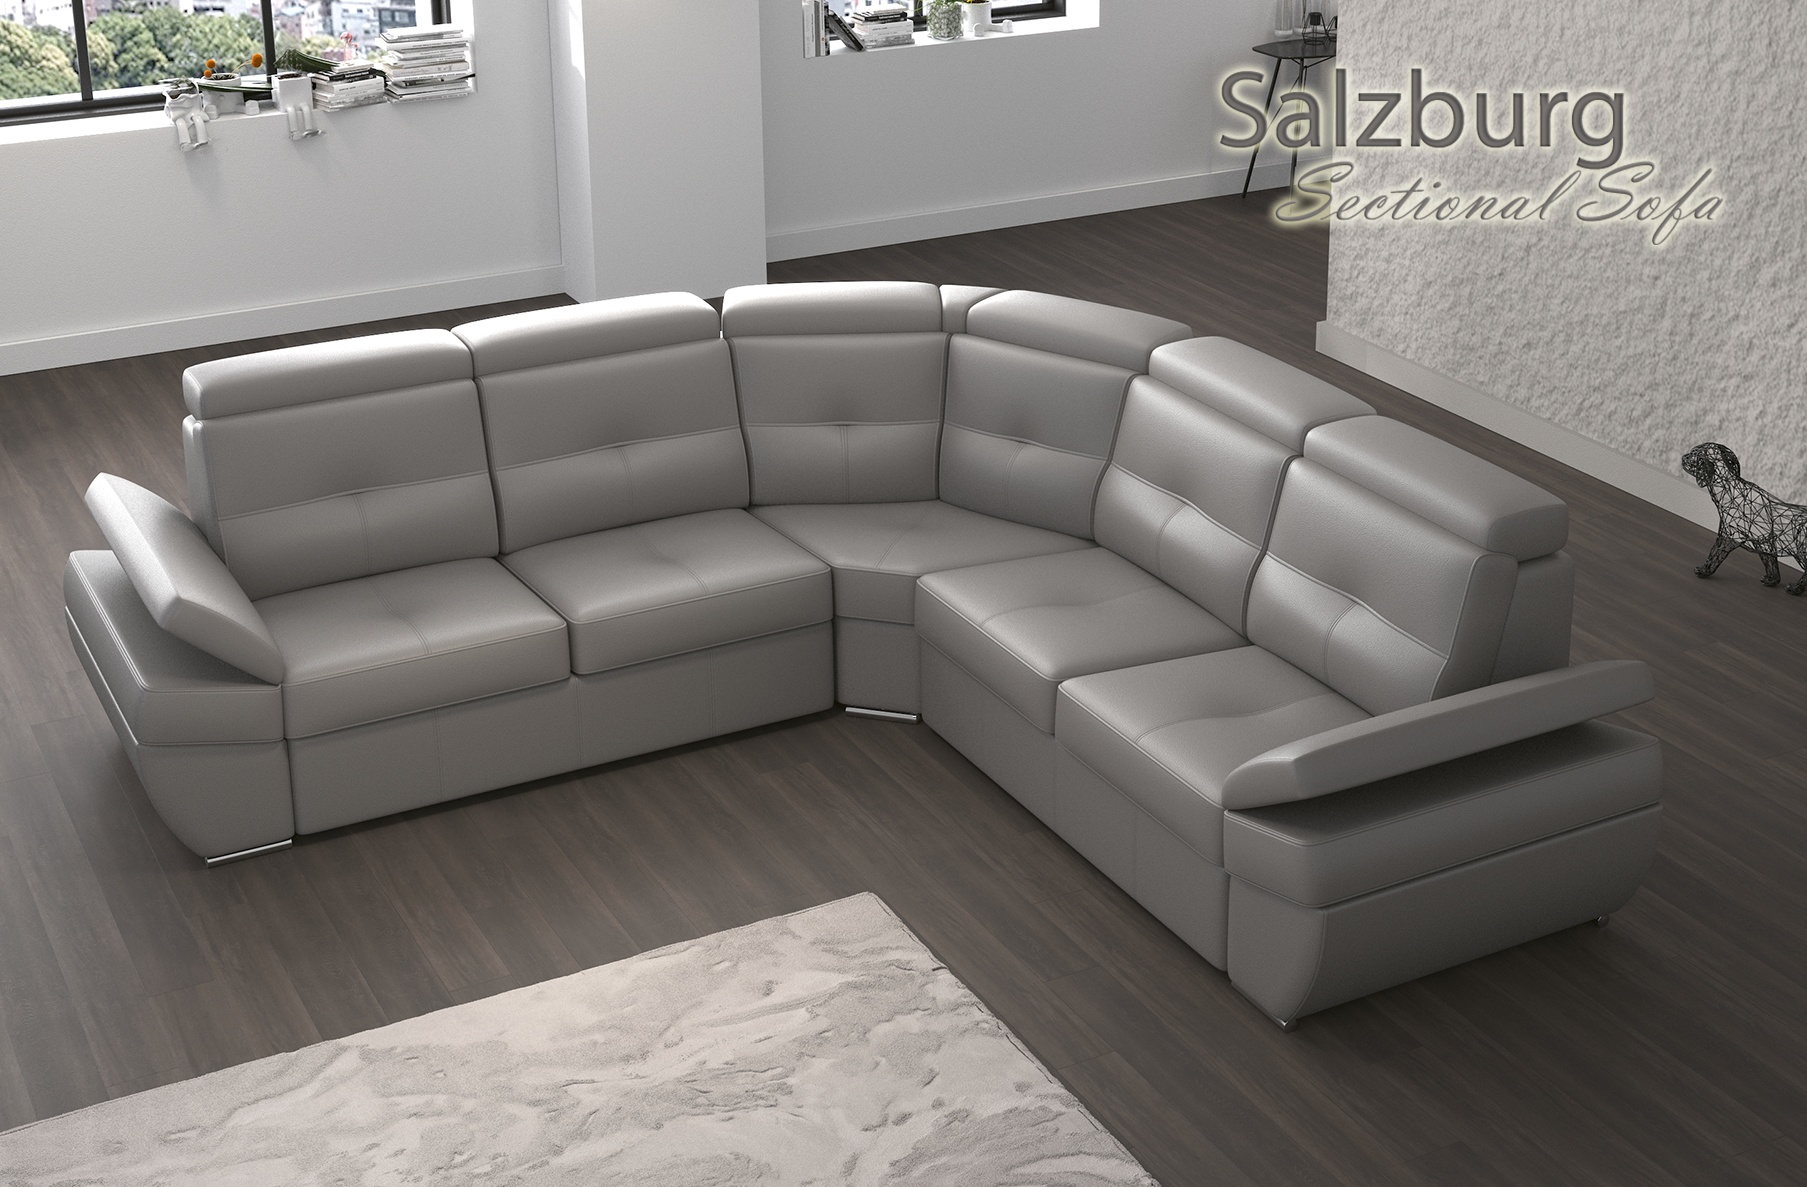 Salzburg Sectional In New Jersey